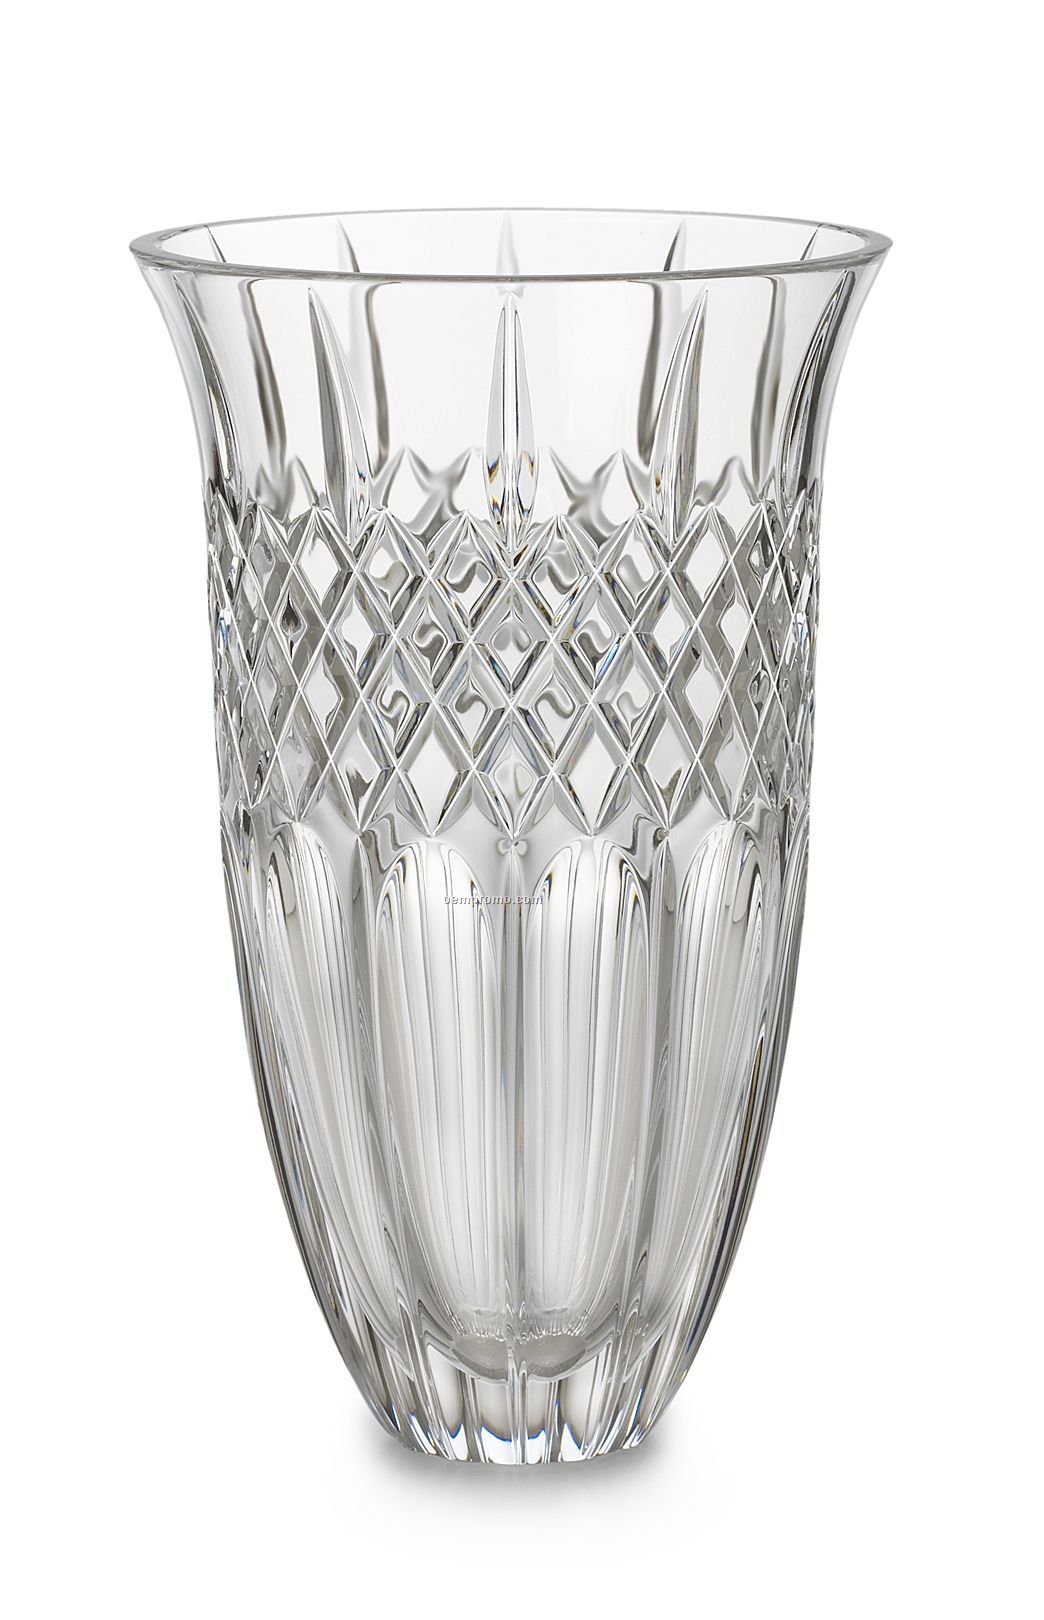 Marquis By Waterford 151180 Shelton 10" Vase